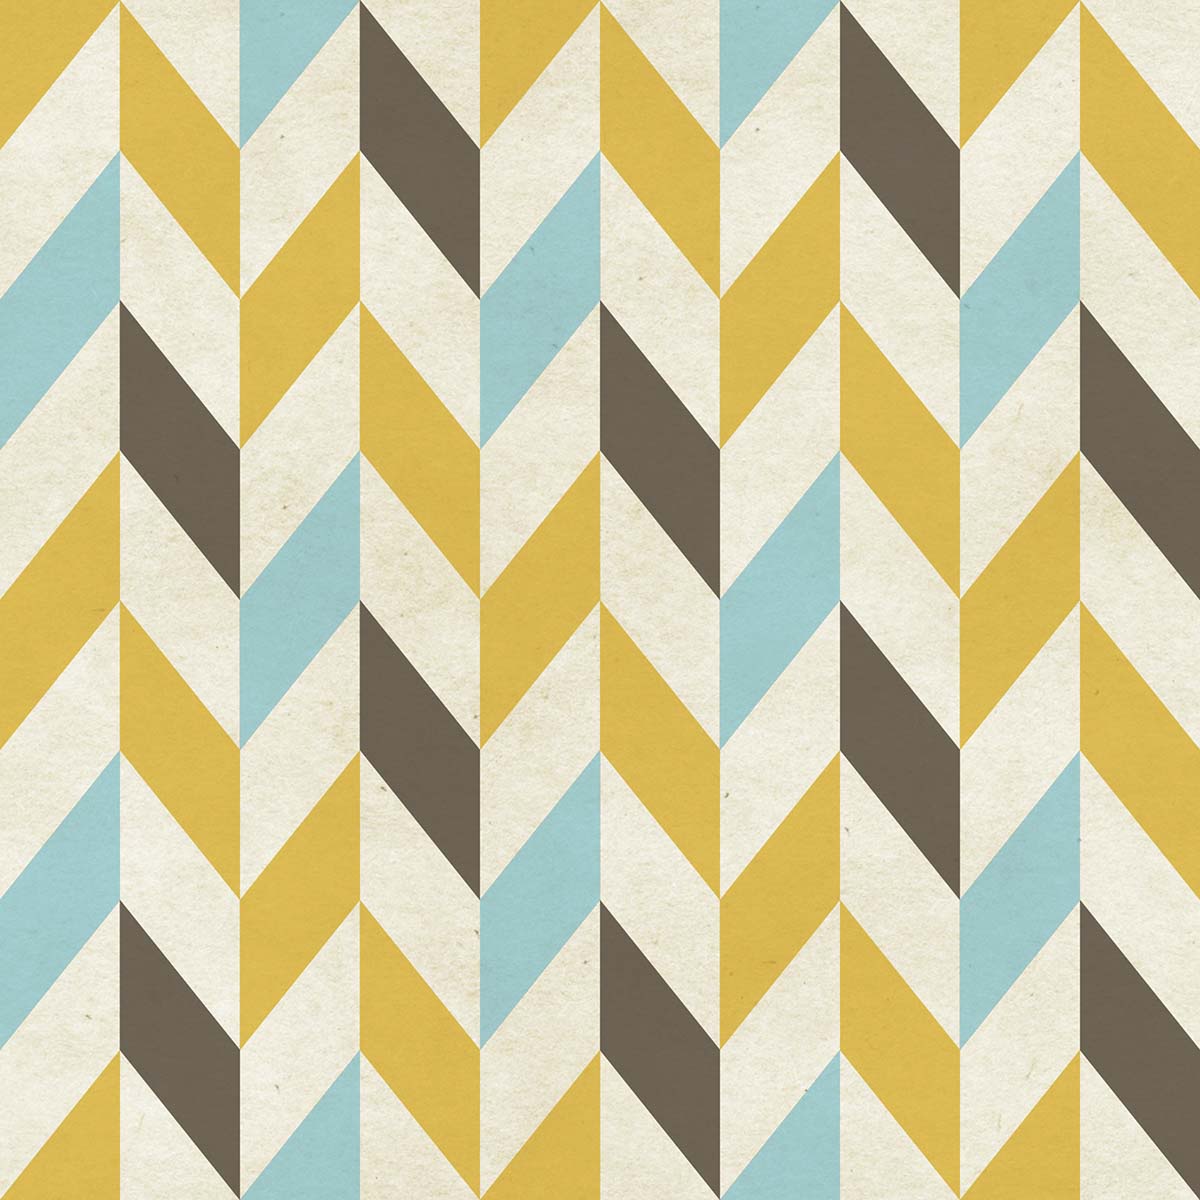 A pattern of blue yellow and brown chevrons